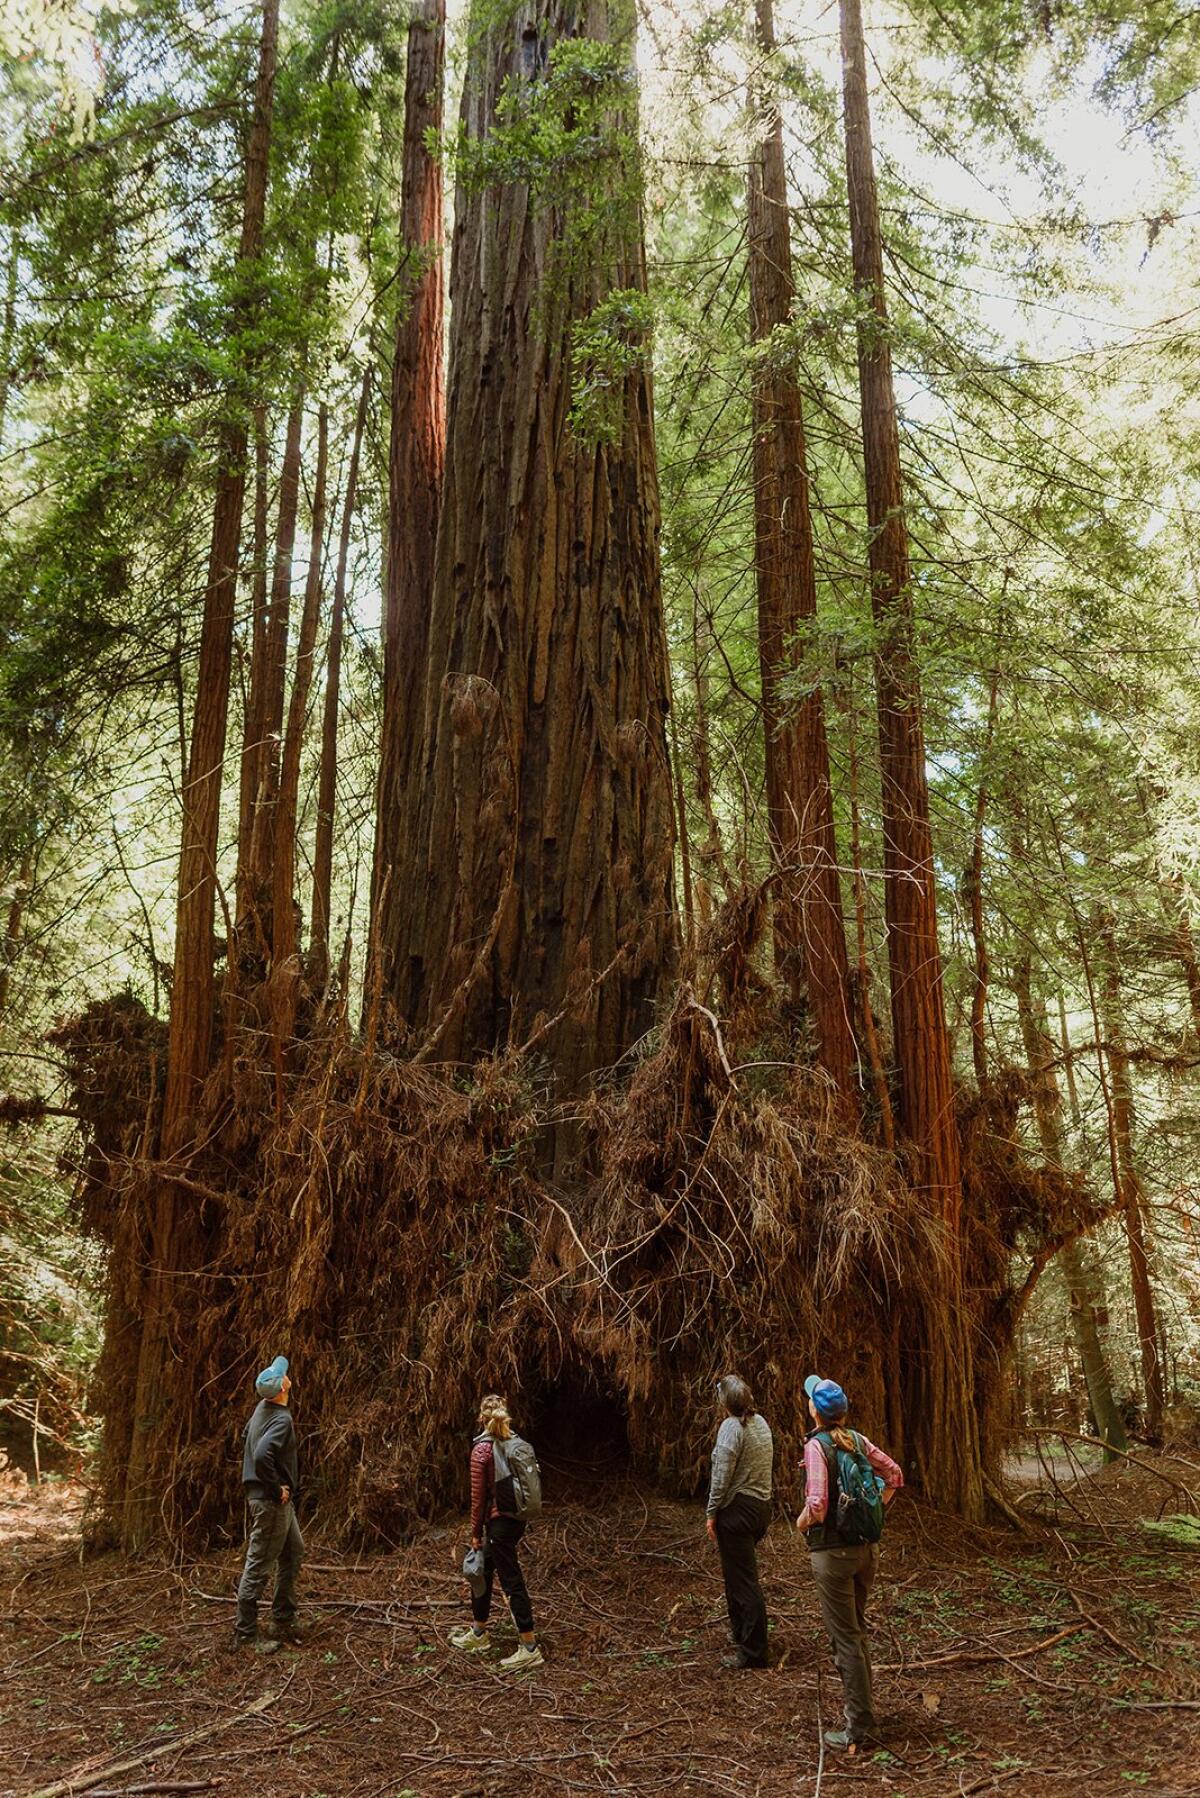 Four people look up at a giant tree.